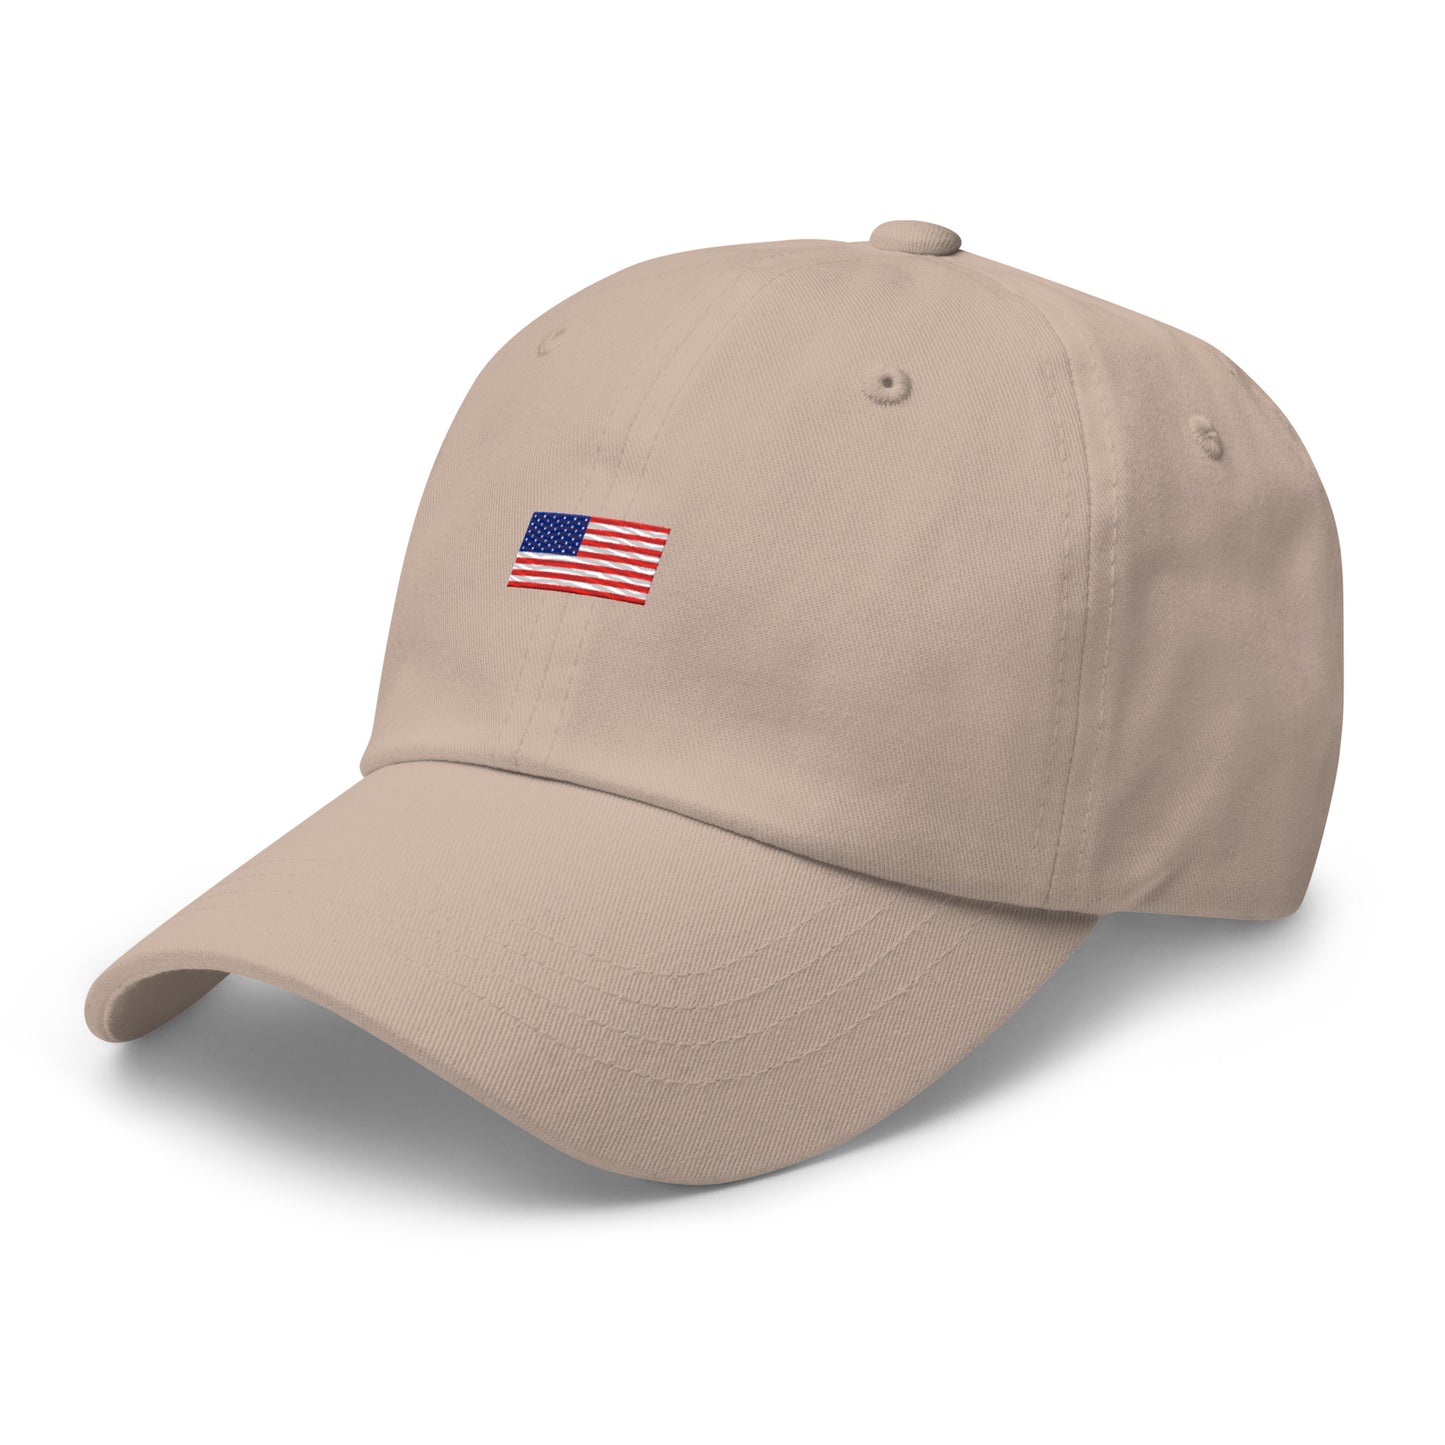 cap-from-the-front-with-american-flag